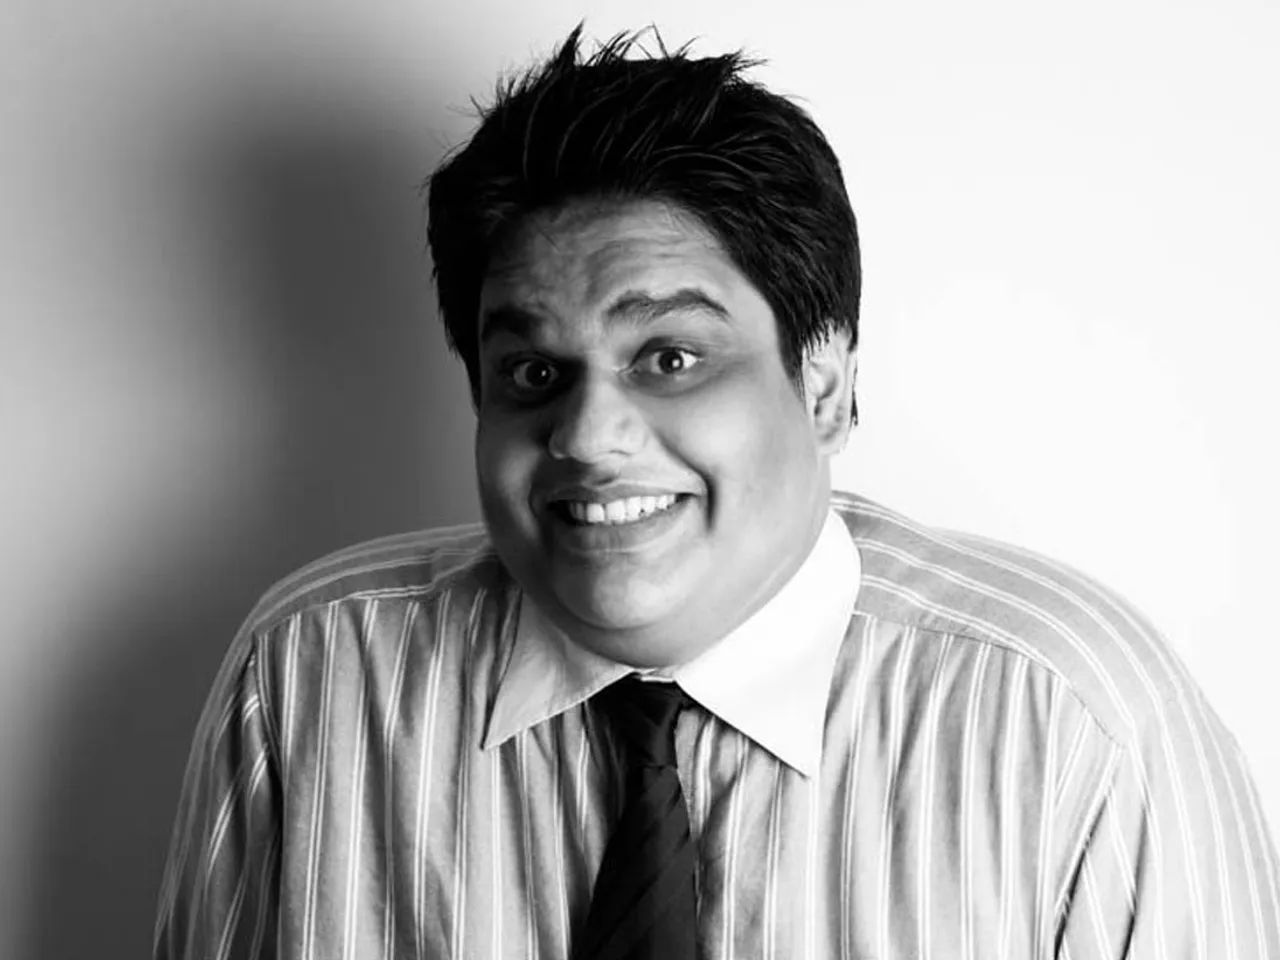 #TanmayBhatRoasted: 5 lessons for your brand on Social Media - Snapchat